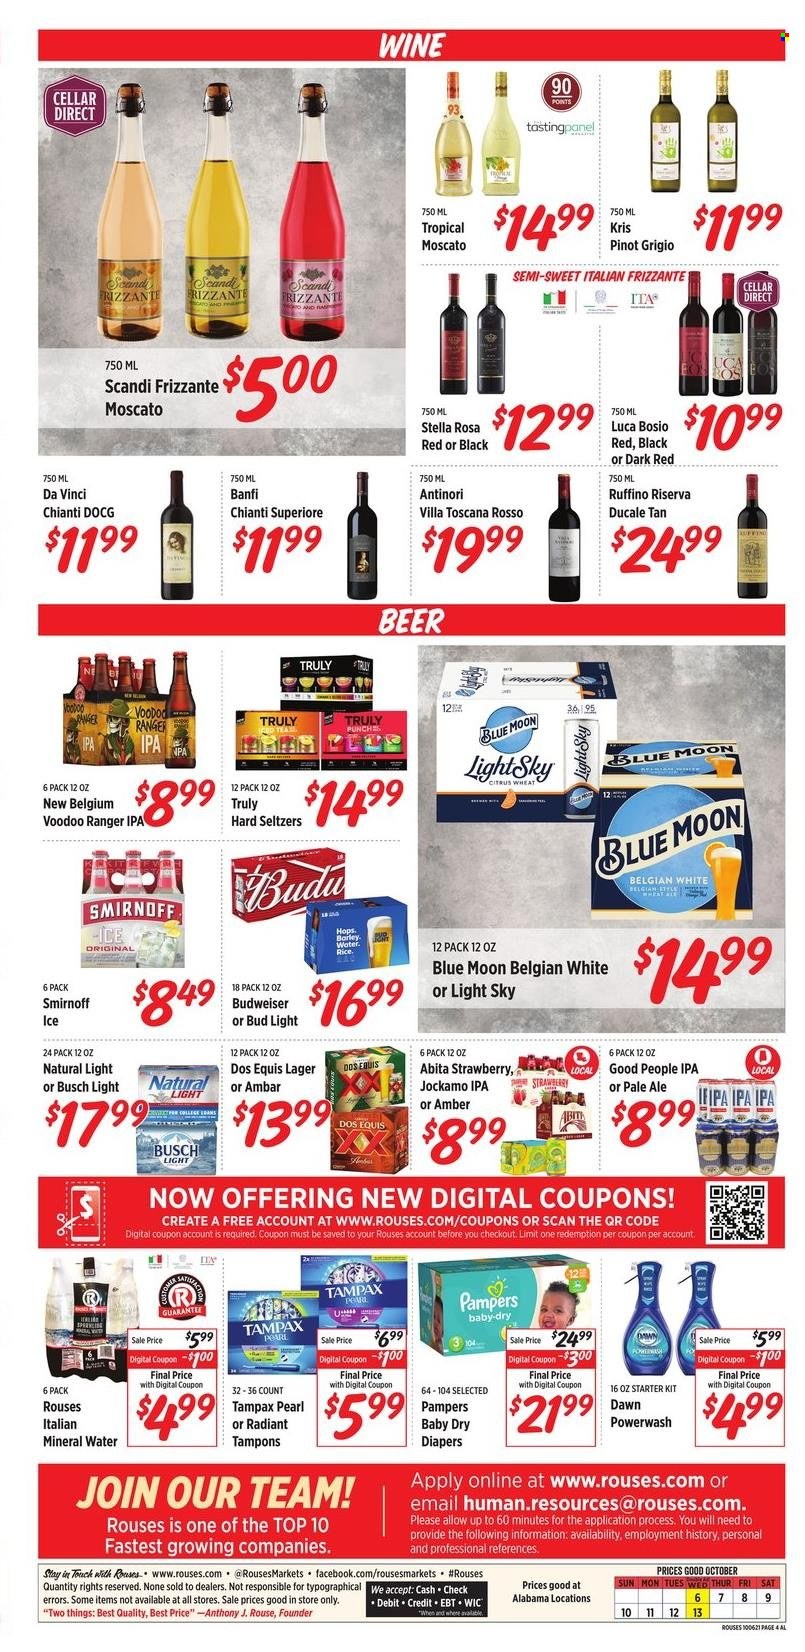 Rouses Markets ad  - 10.06.2021 - 10.13.2021.